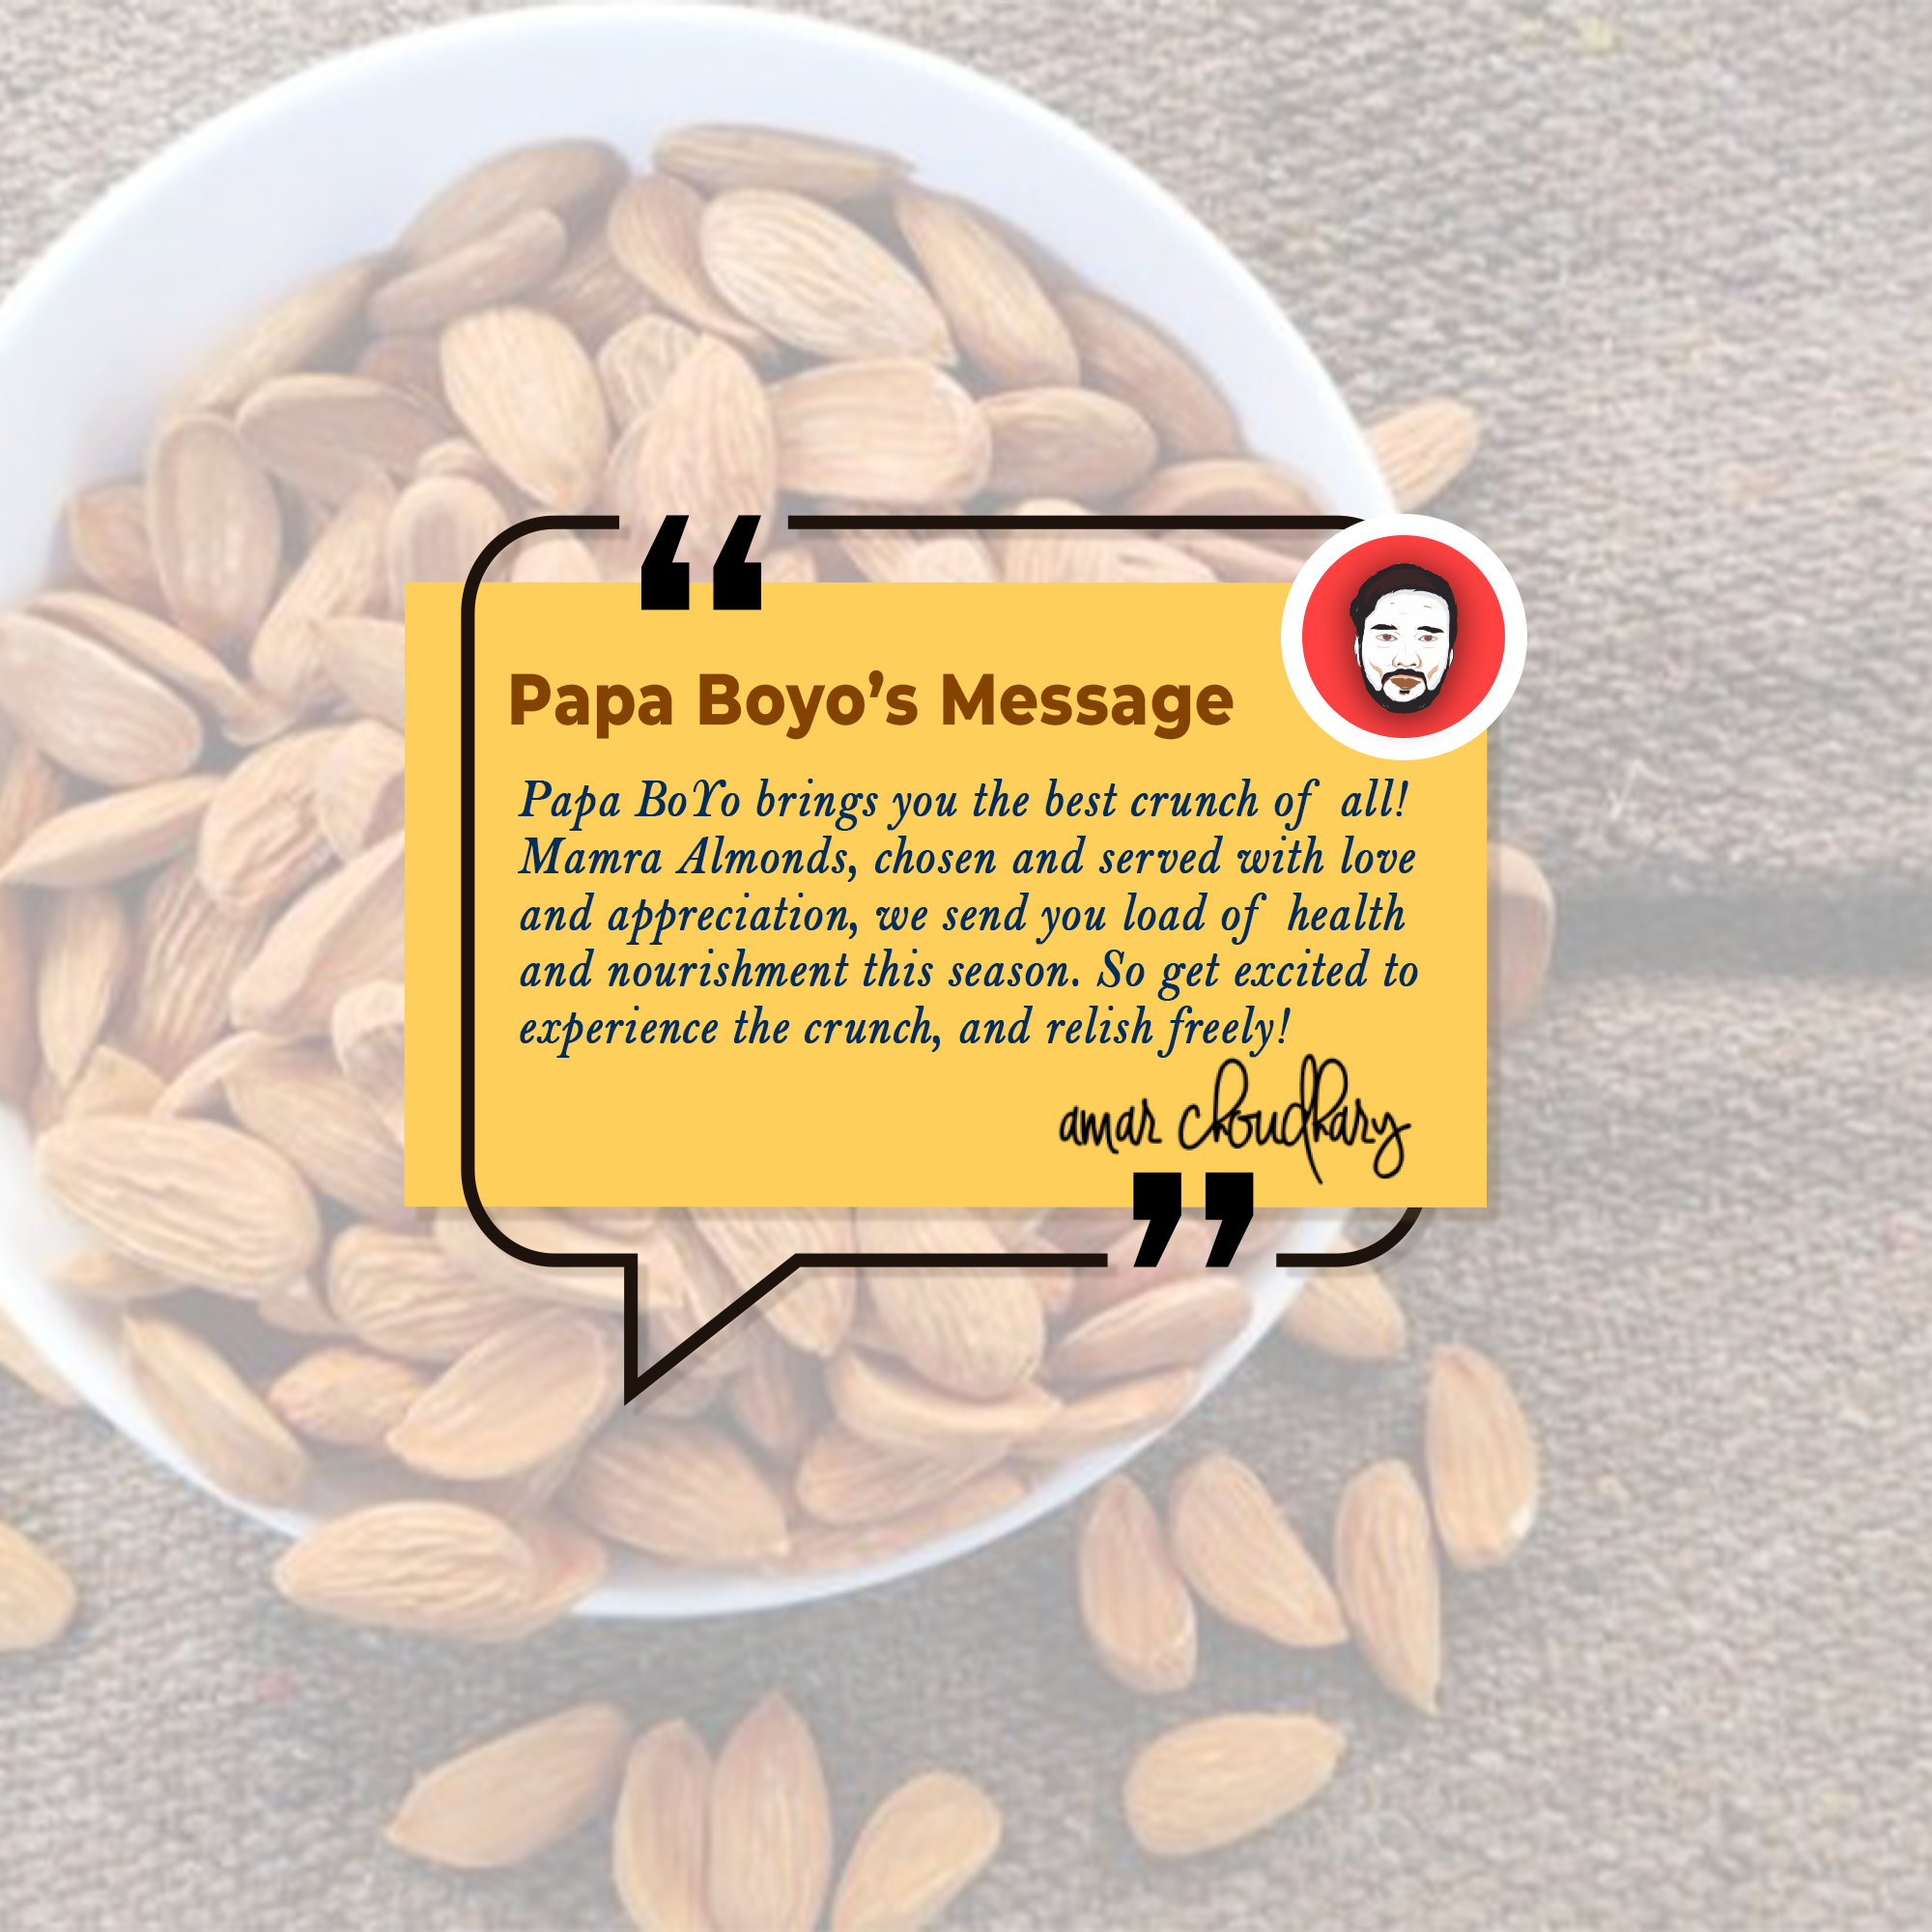 BOYO Almond 200g - Raw Mamra Almonds - Healthy Snacks and Dry Fruits - Gluten Free - High in Fiber and Immunity-Boosting Nutrients